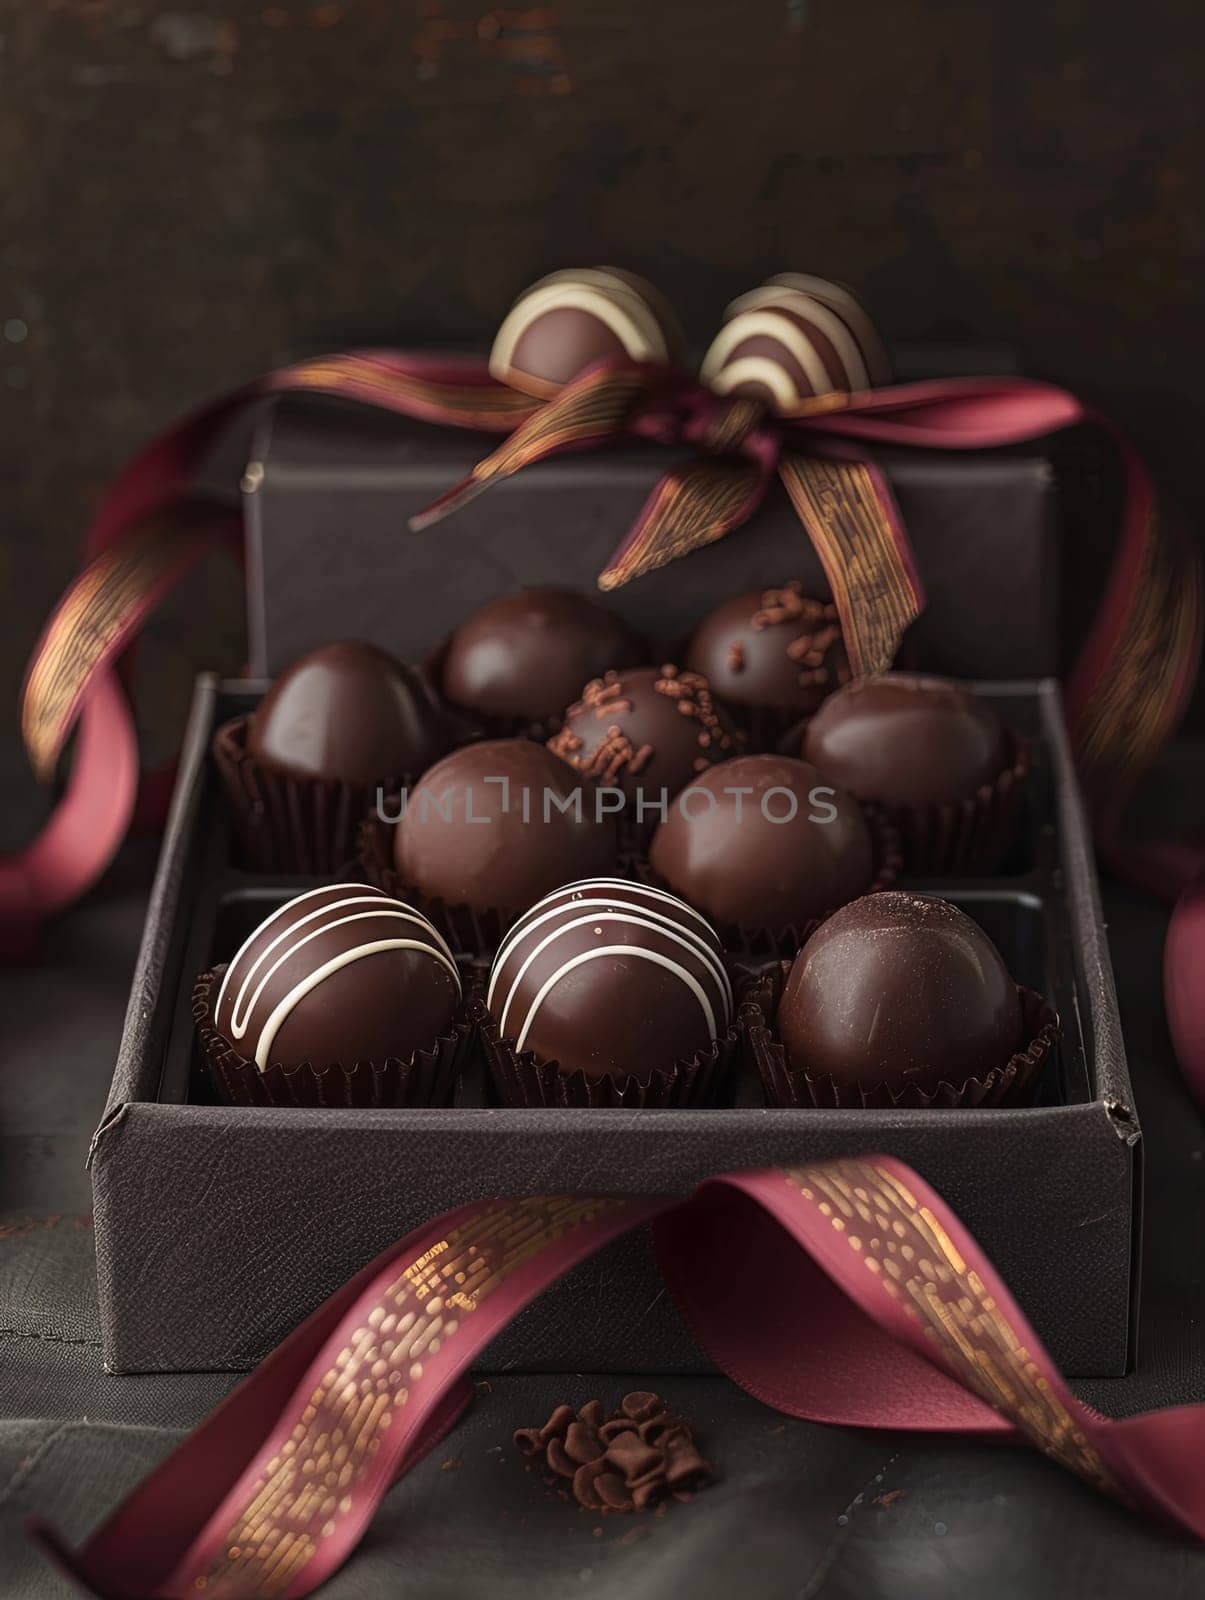 Elegant box of chocolate truffles adorned with a ribbon, showcasing rich dark colors and high attention to detail.